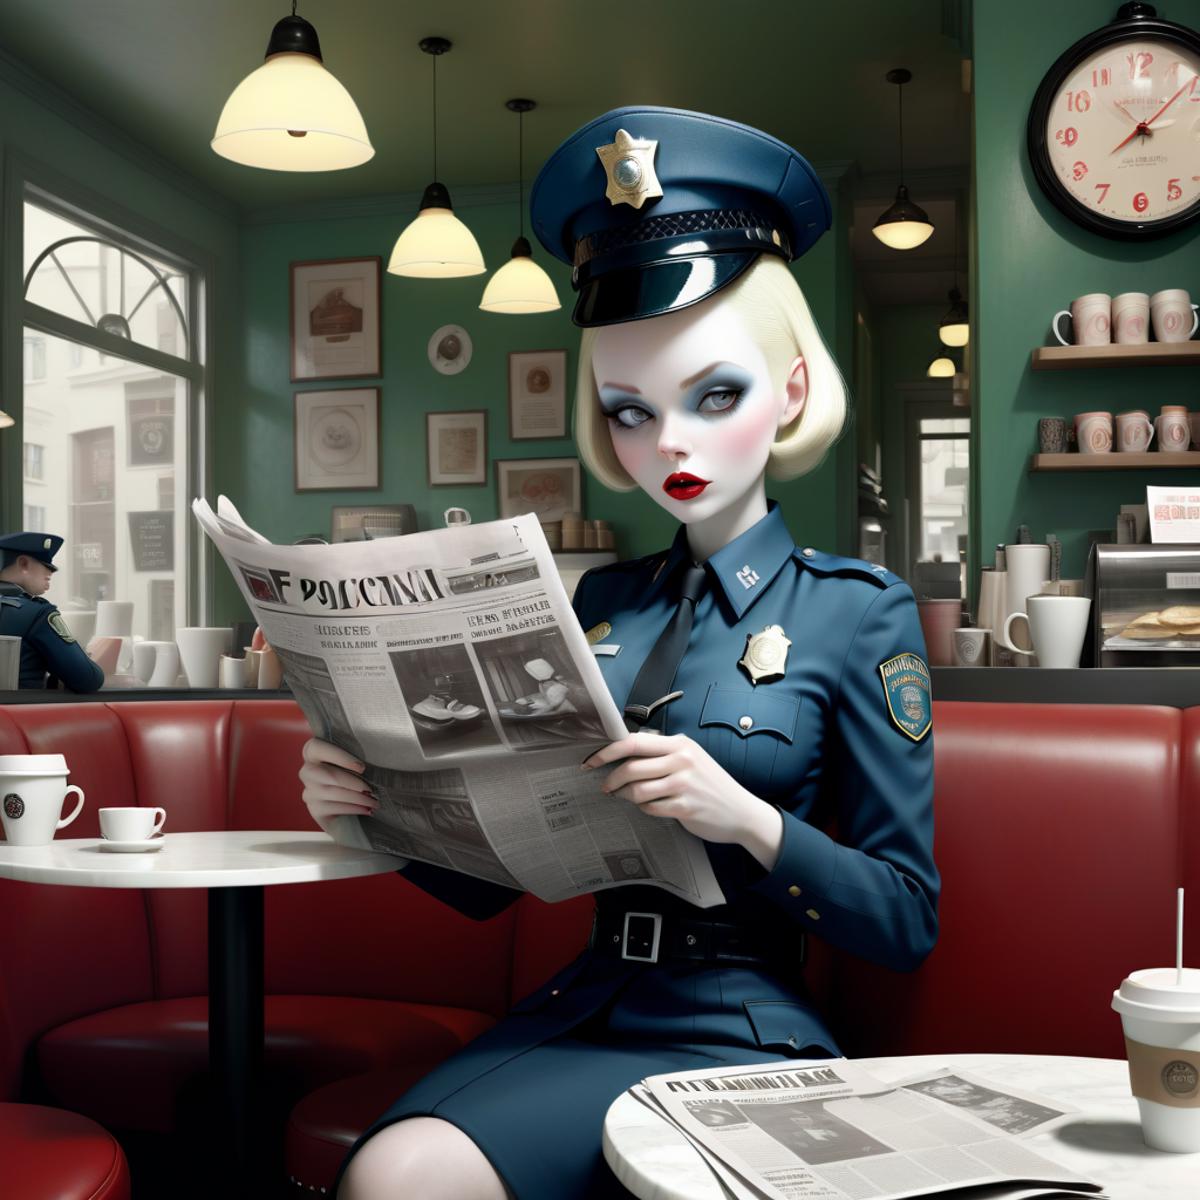 A 3D animated character of a policewoman reading a newspaper.